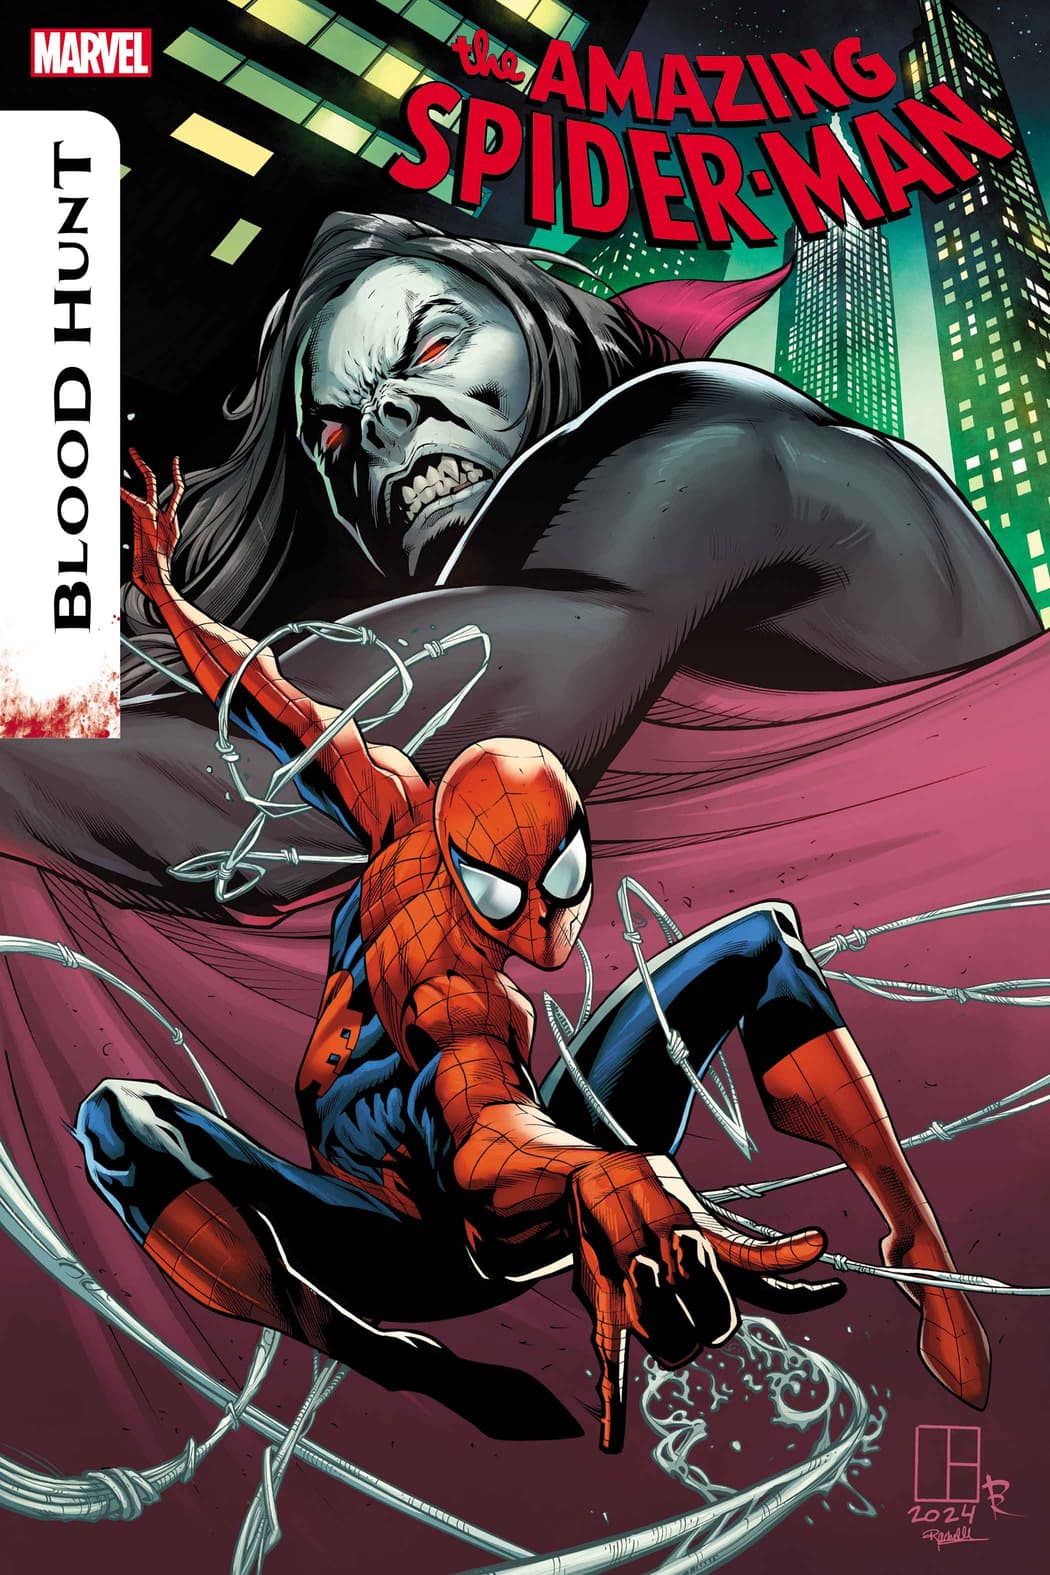 AMAZING SPIDER-MAN: BLOOD HUNT #1 cover by Marcelo Ferreira